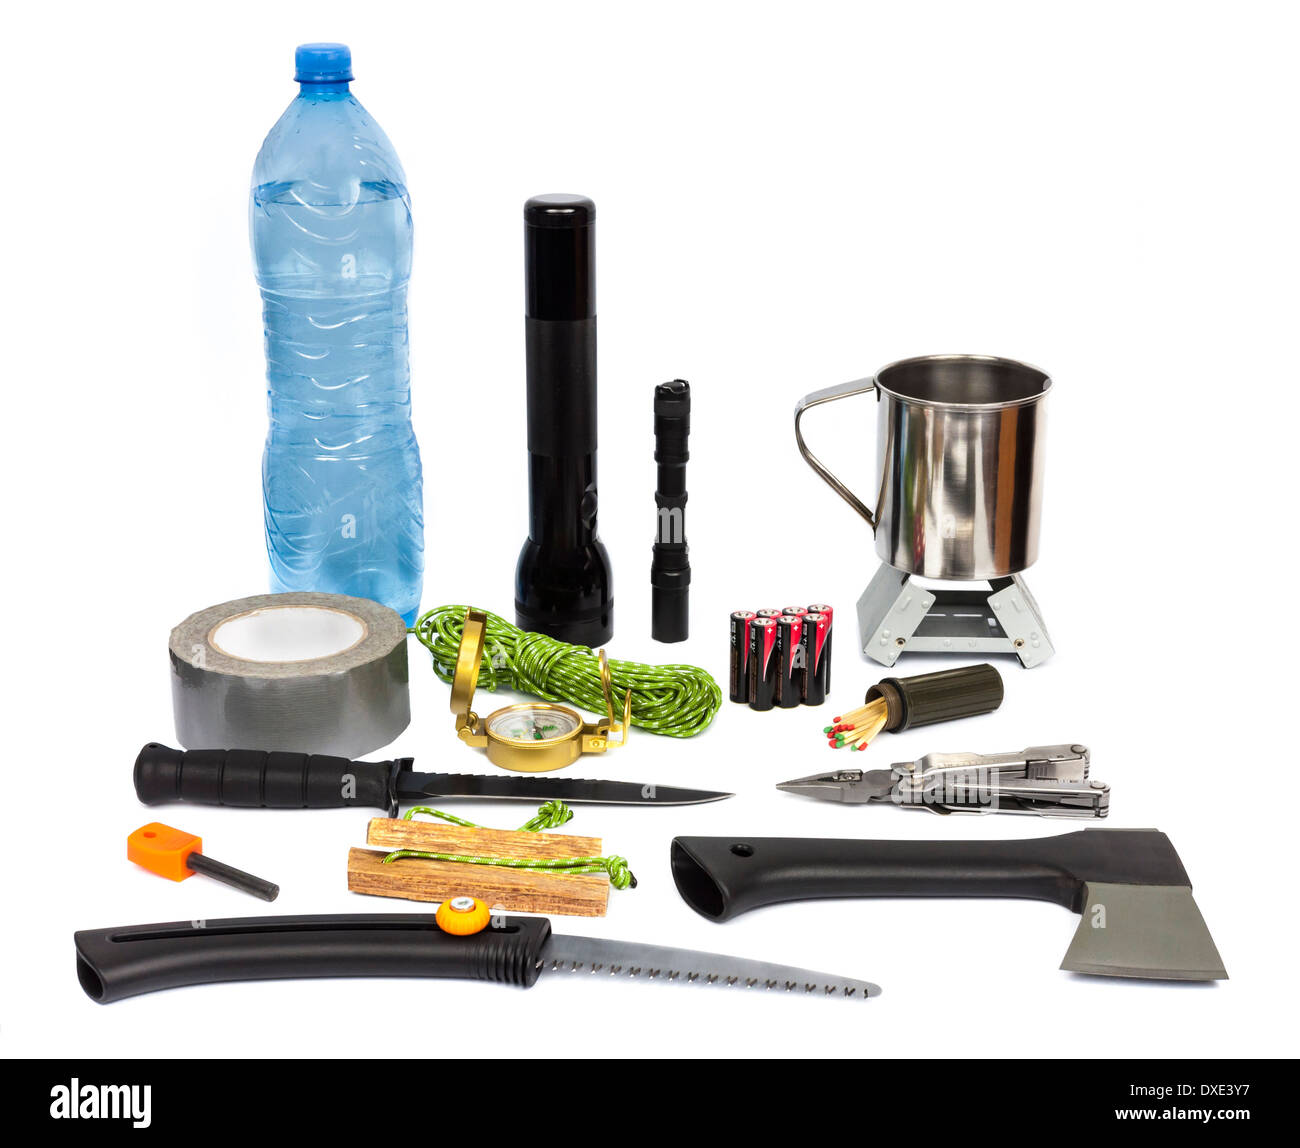 Survival kit with emergency supplies Stock Photo